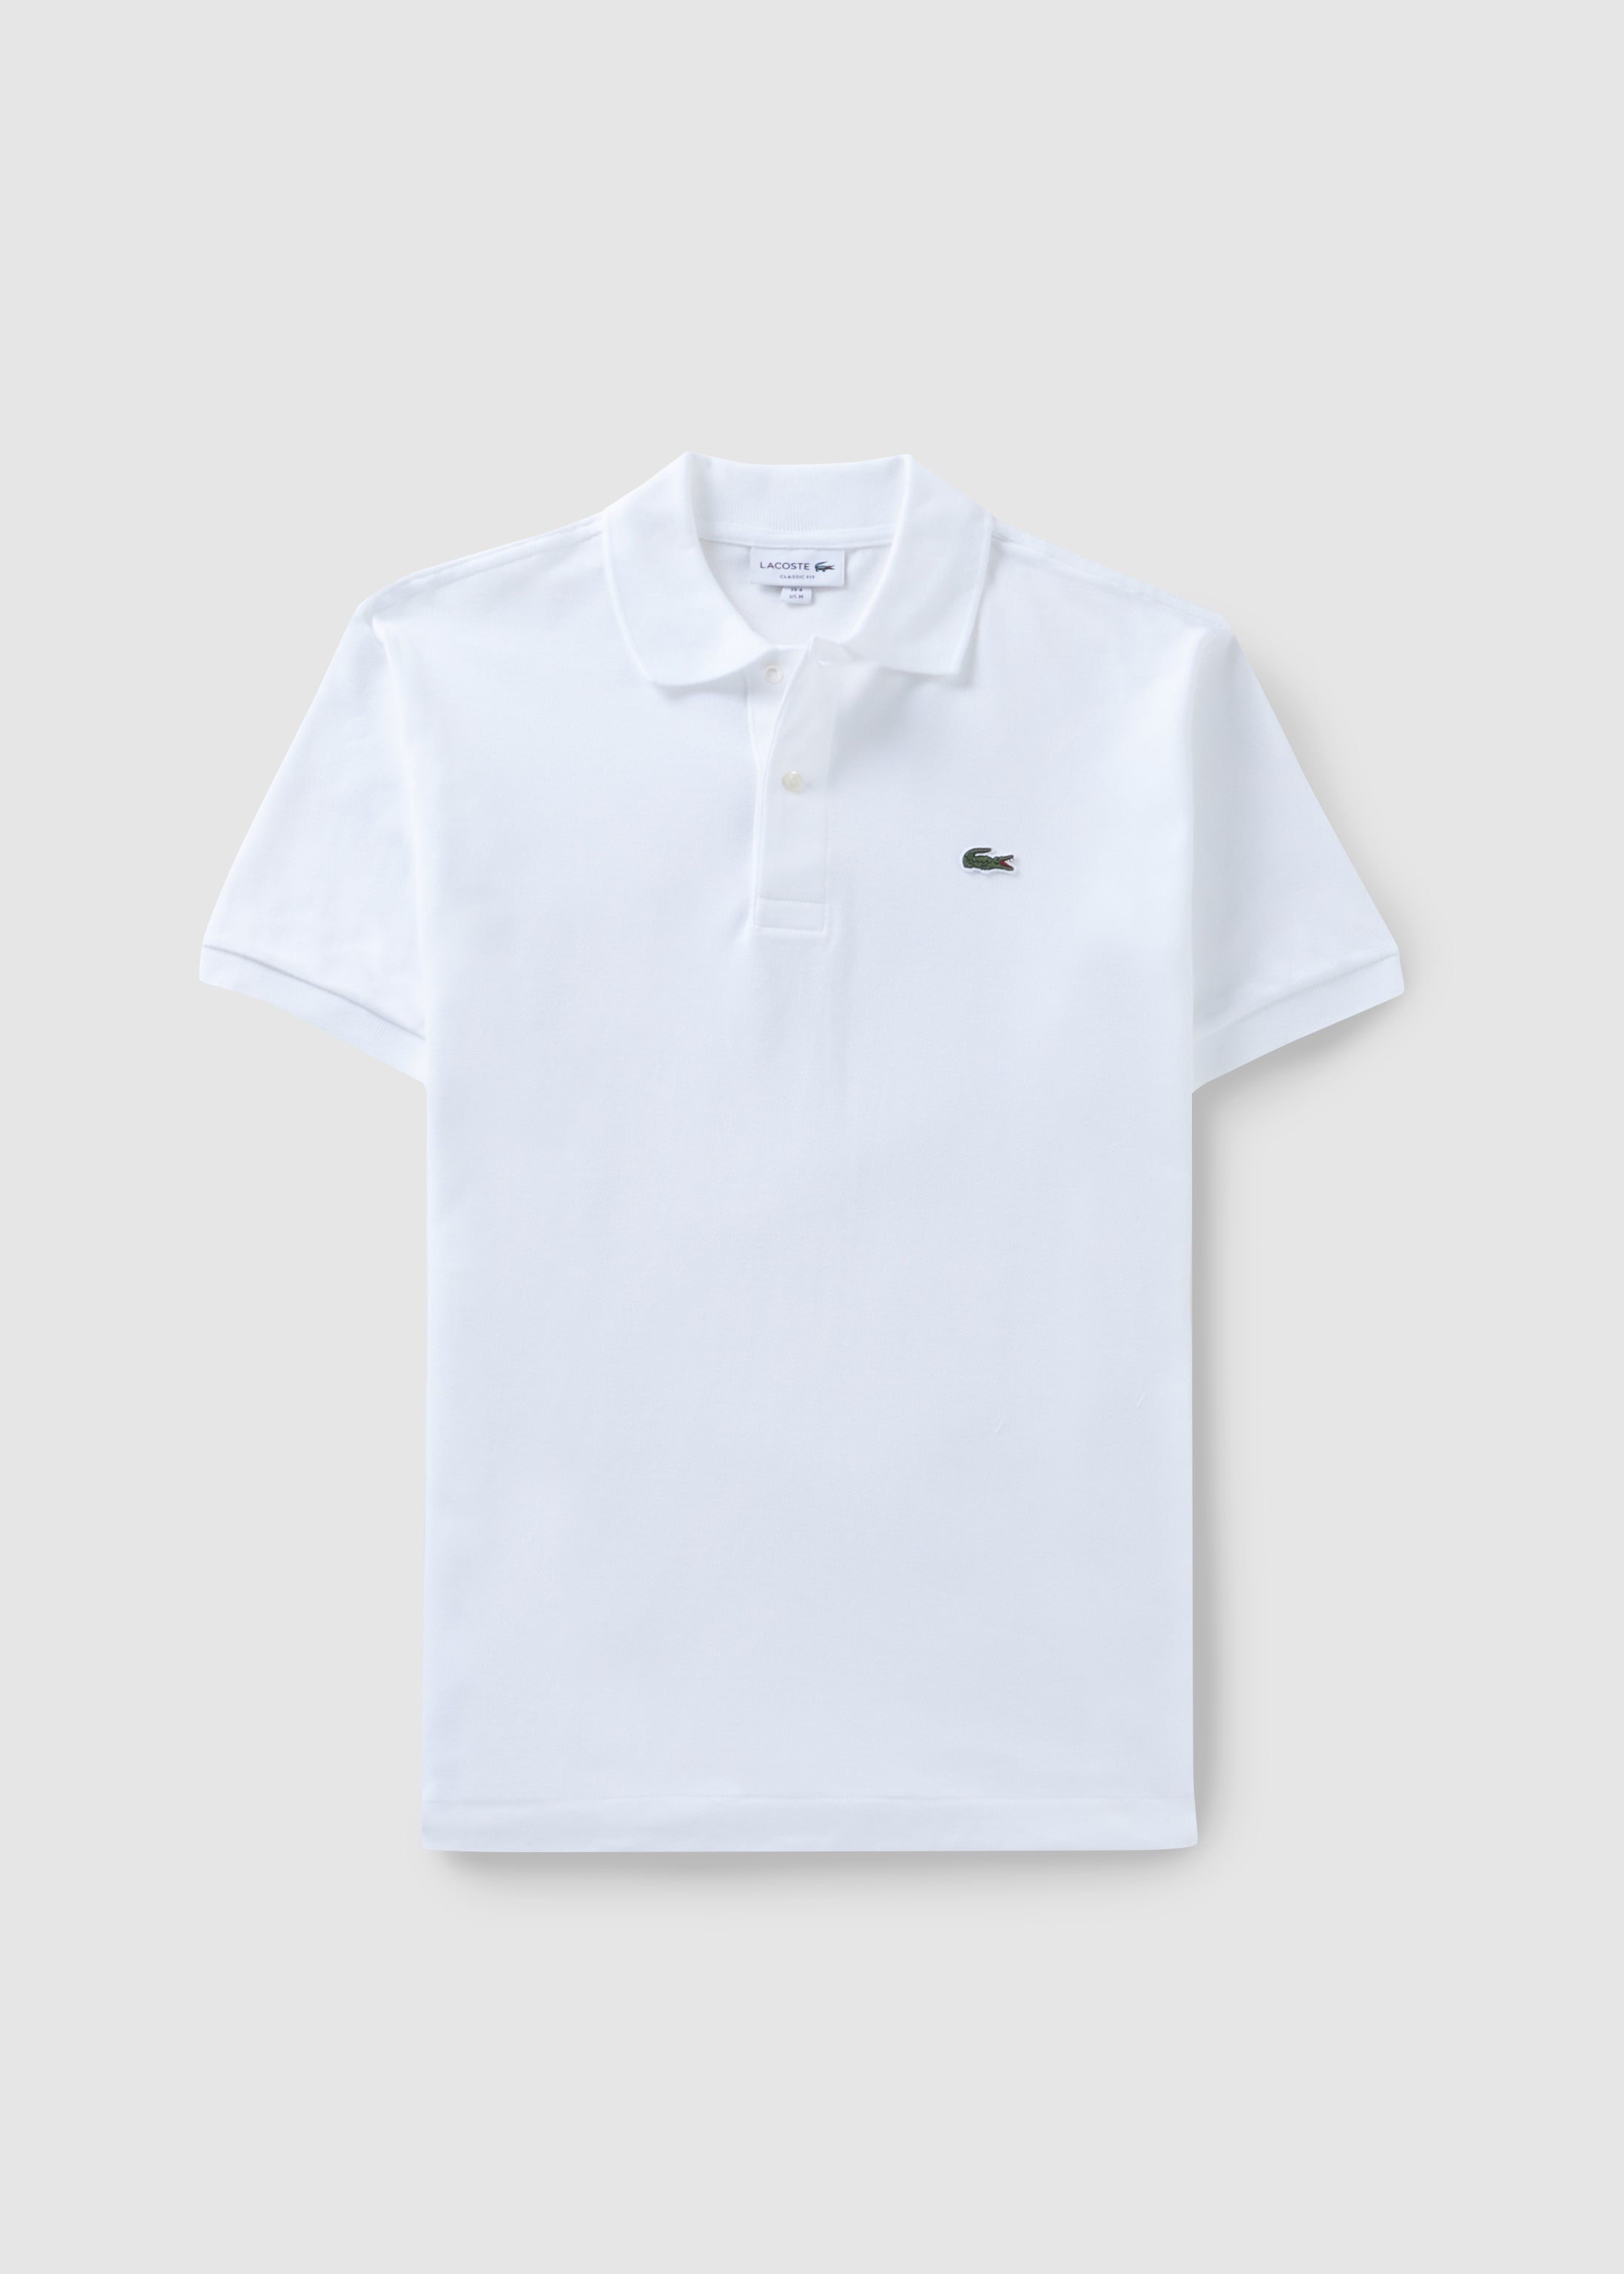 Image of Lacoste Mens Classic Pique Polo Shirt In White